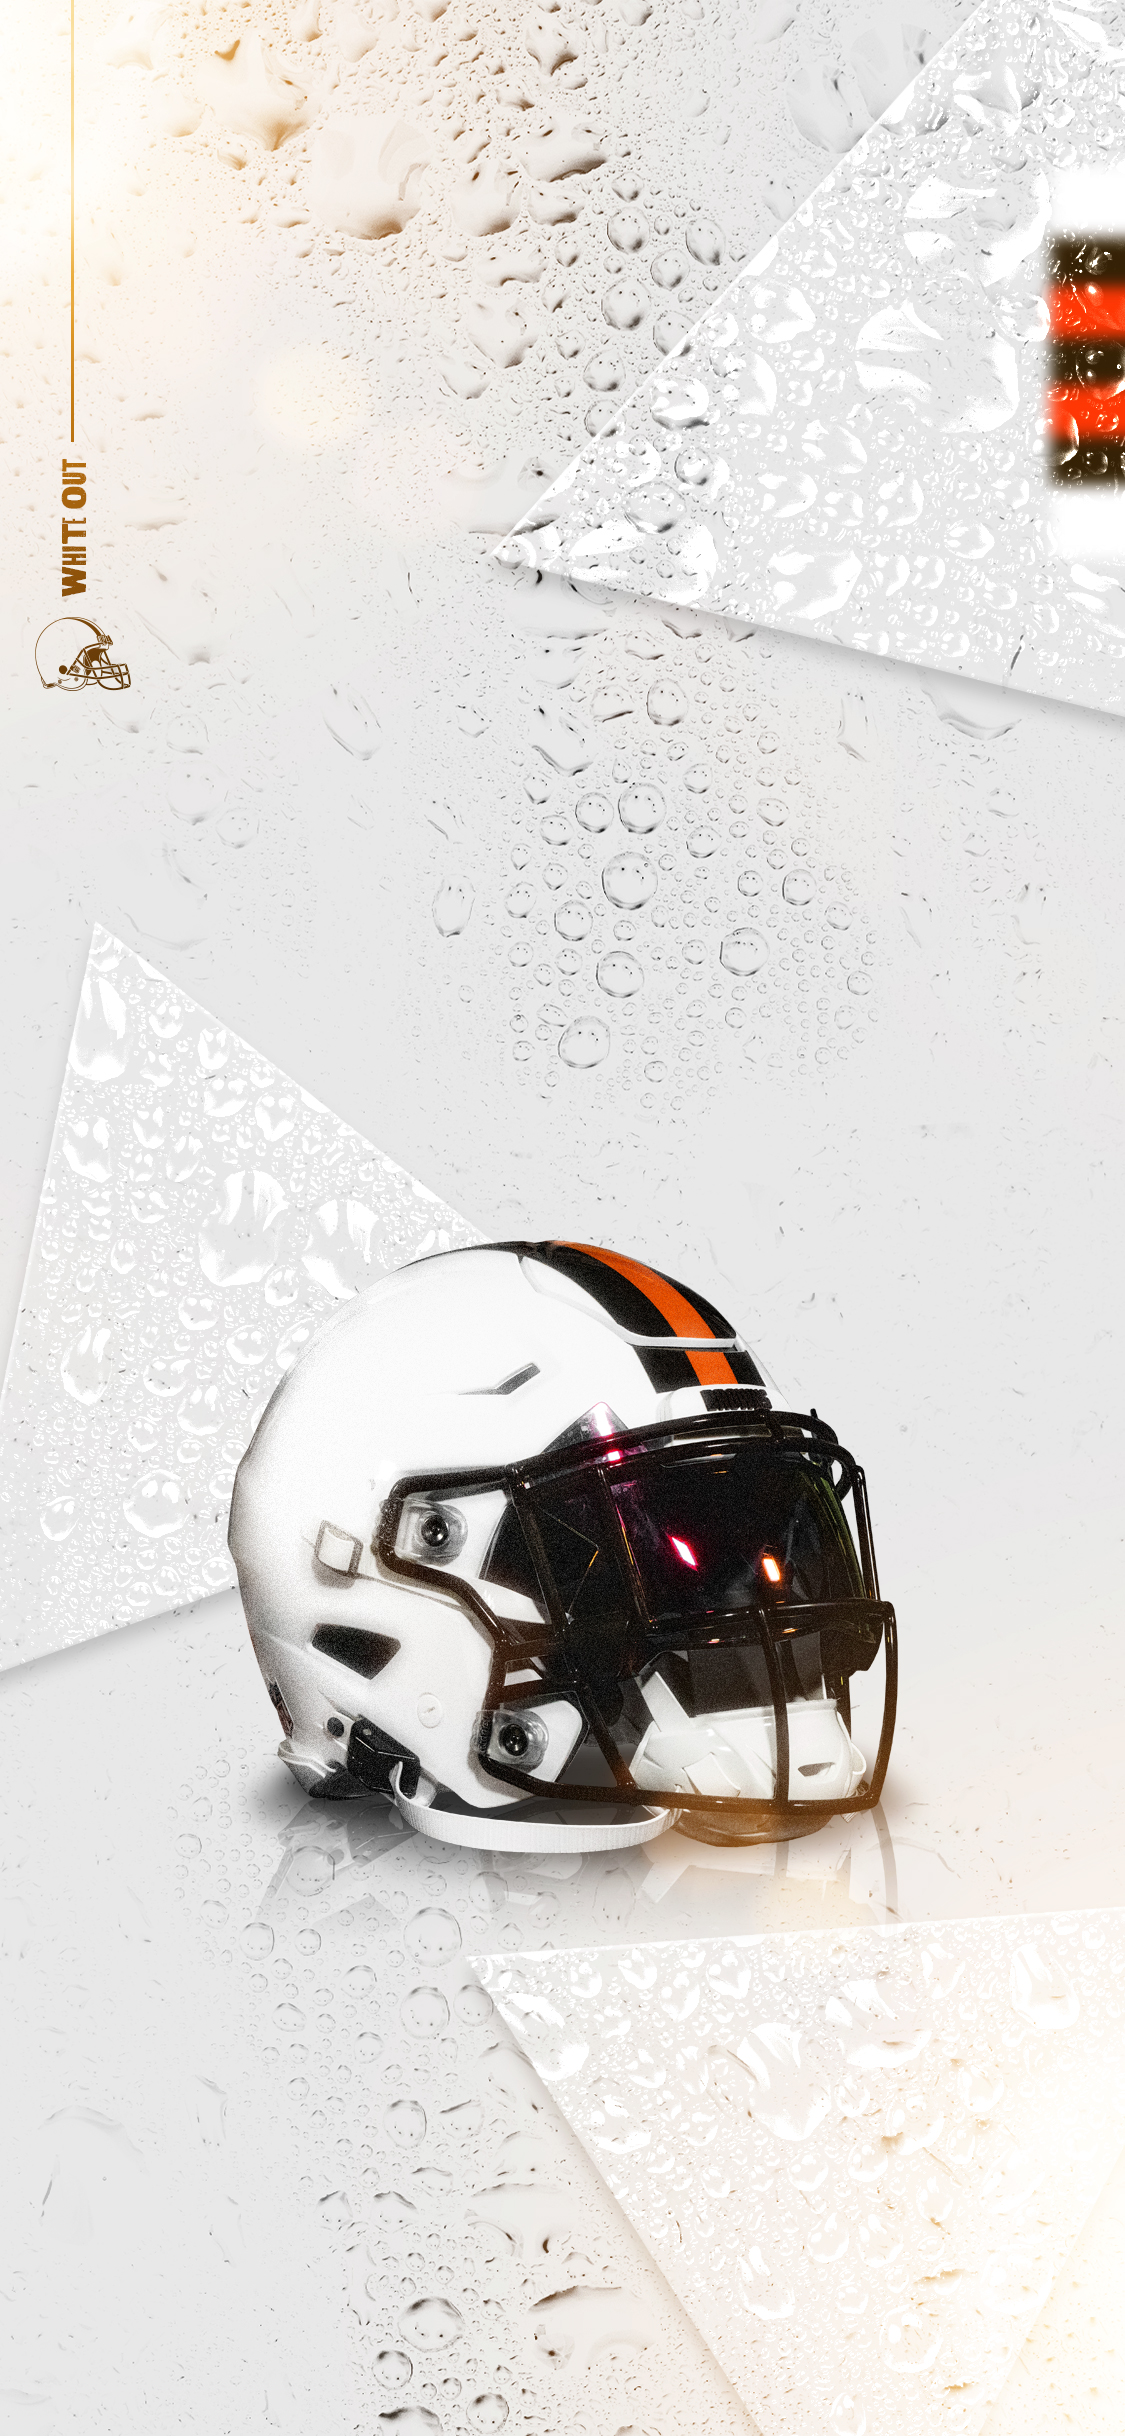 Browns Mobile Wallpapers  Cleveland Browns 